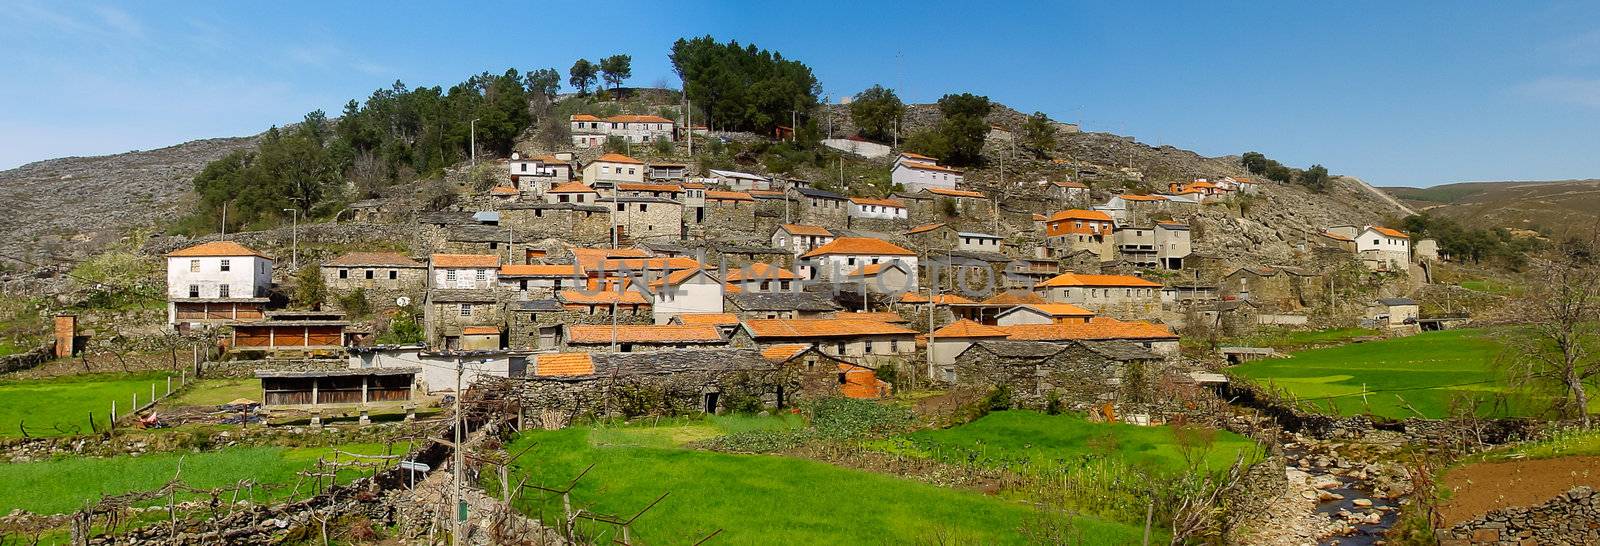 Old moutain village in Portugal by homydesign